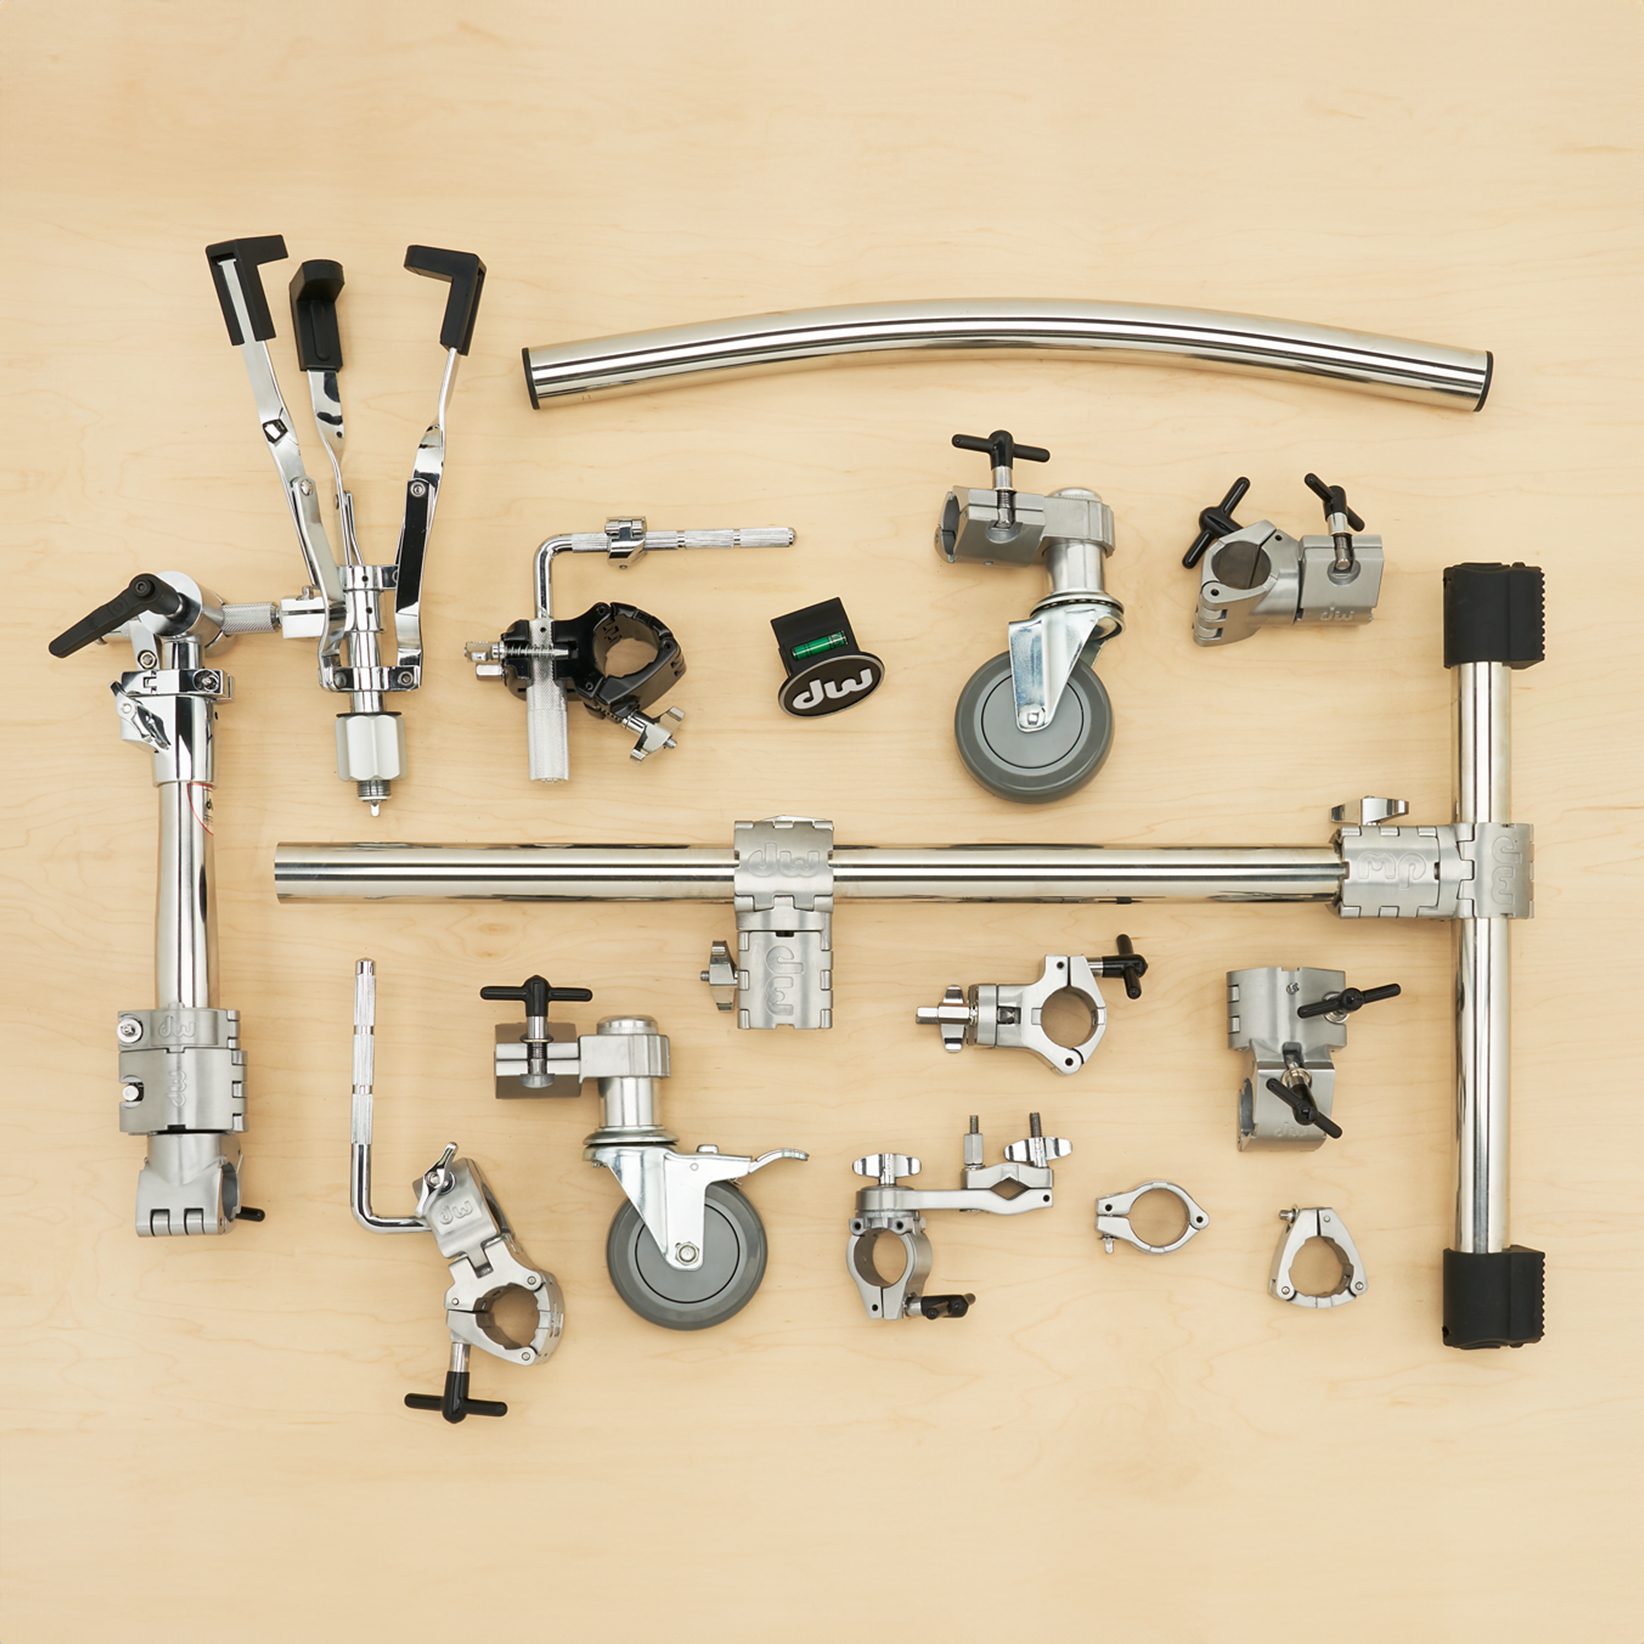 A selection of DW rack parts including memory locks, tubing, and accessory arms and clamps.